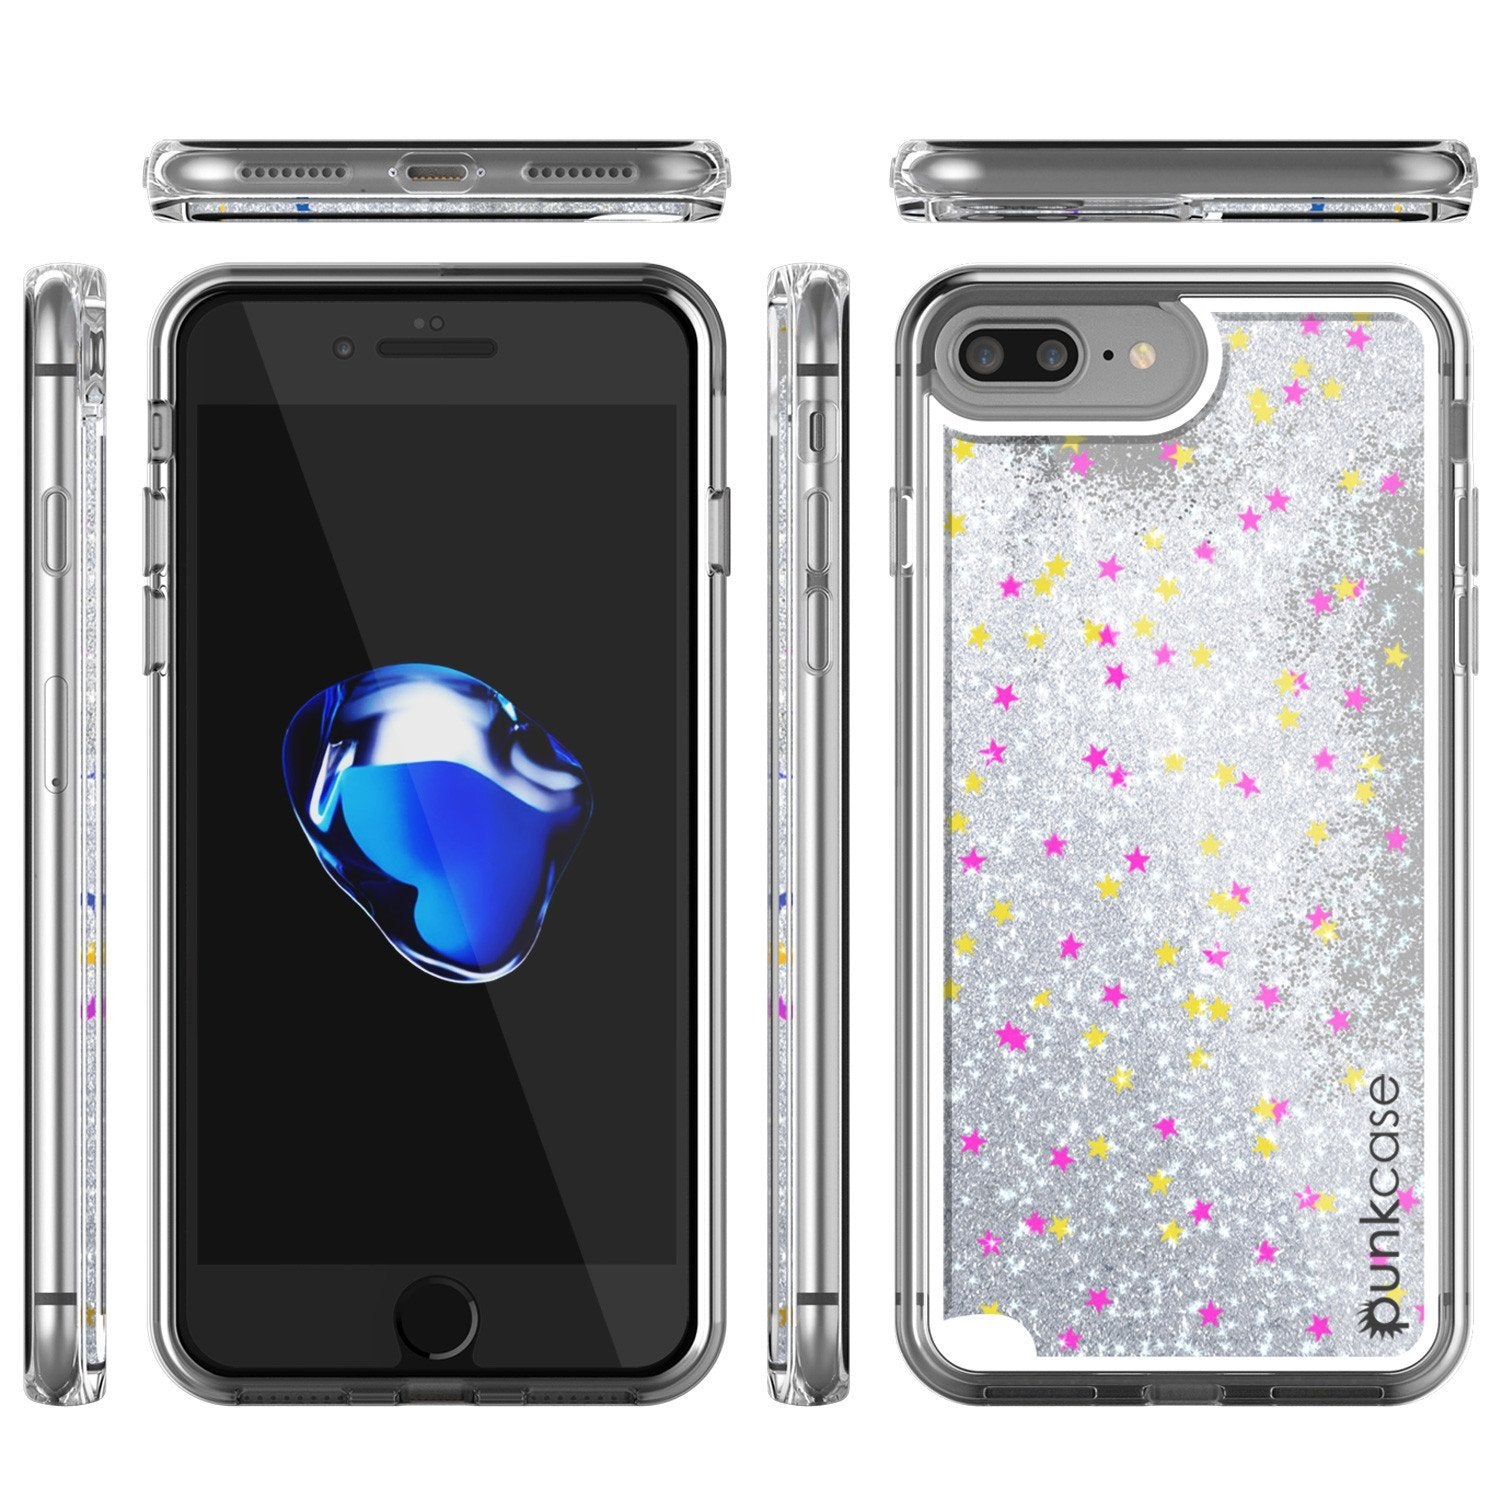 iPhone 8+ Plus Case, PunkCase LIQUID Silver Series, Protective Dual Layer Floating Glitter Cover